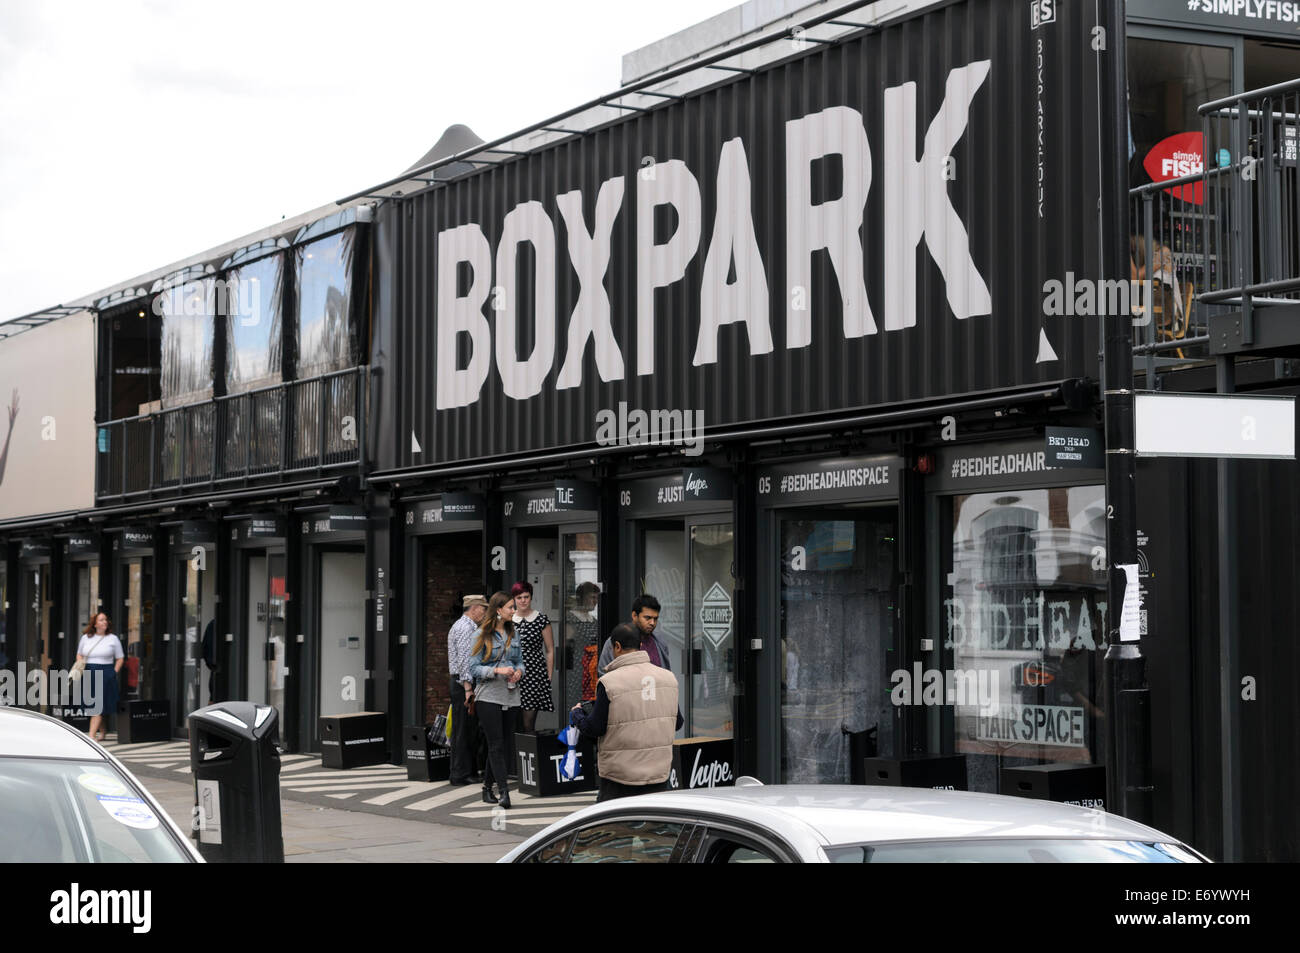 A pop-up mall based in the heart of East London. Stock Photo